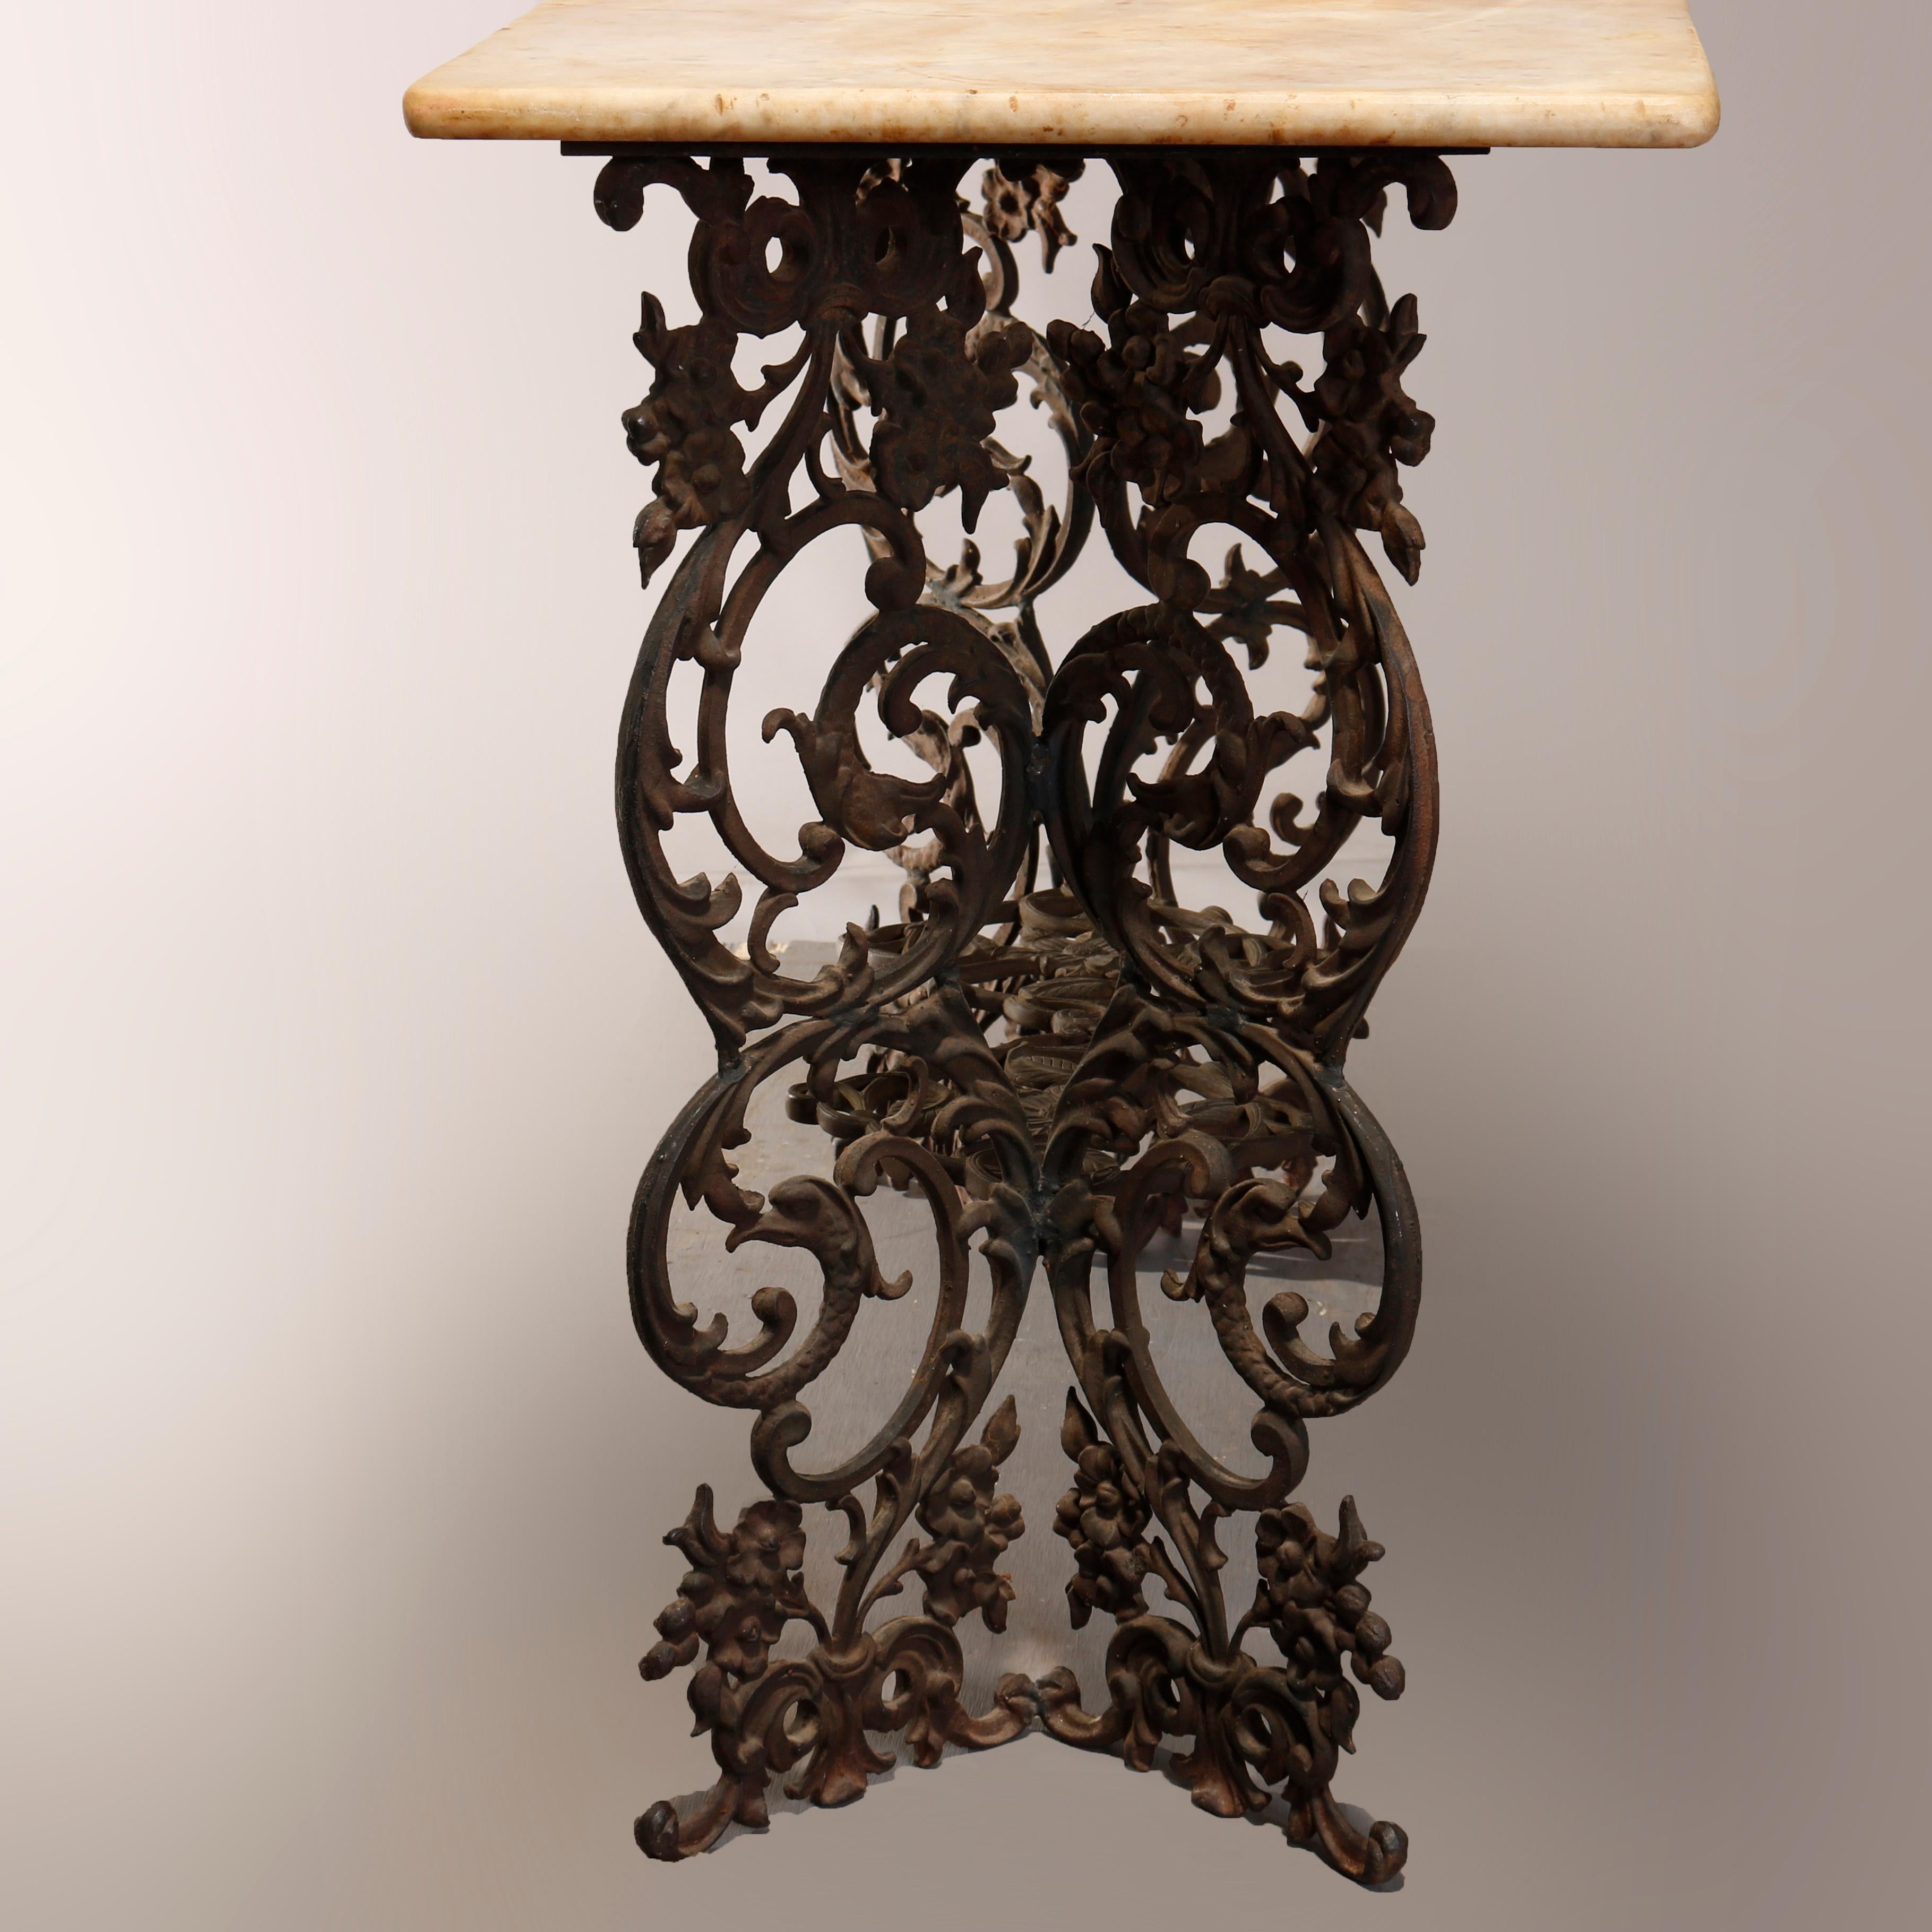 An antique Victorian garden table offers scroll and foliate form cast iron base surmounted by marble top, circa 1890

Measures: 30.5